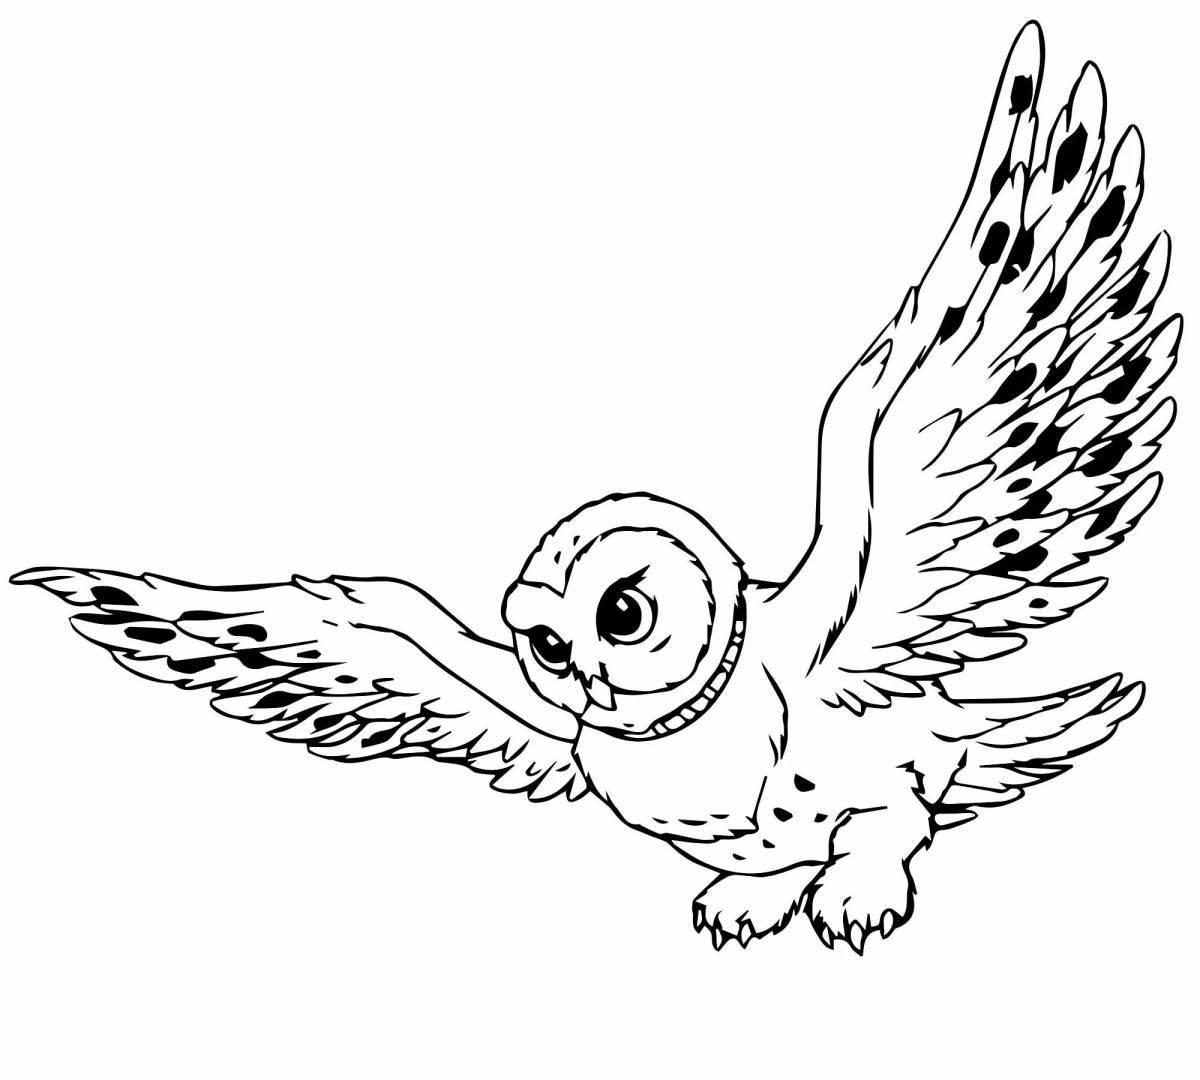 Cute snowy owl coloring pages for kids